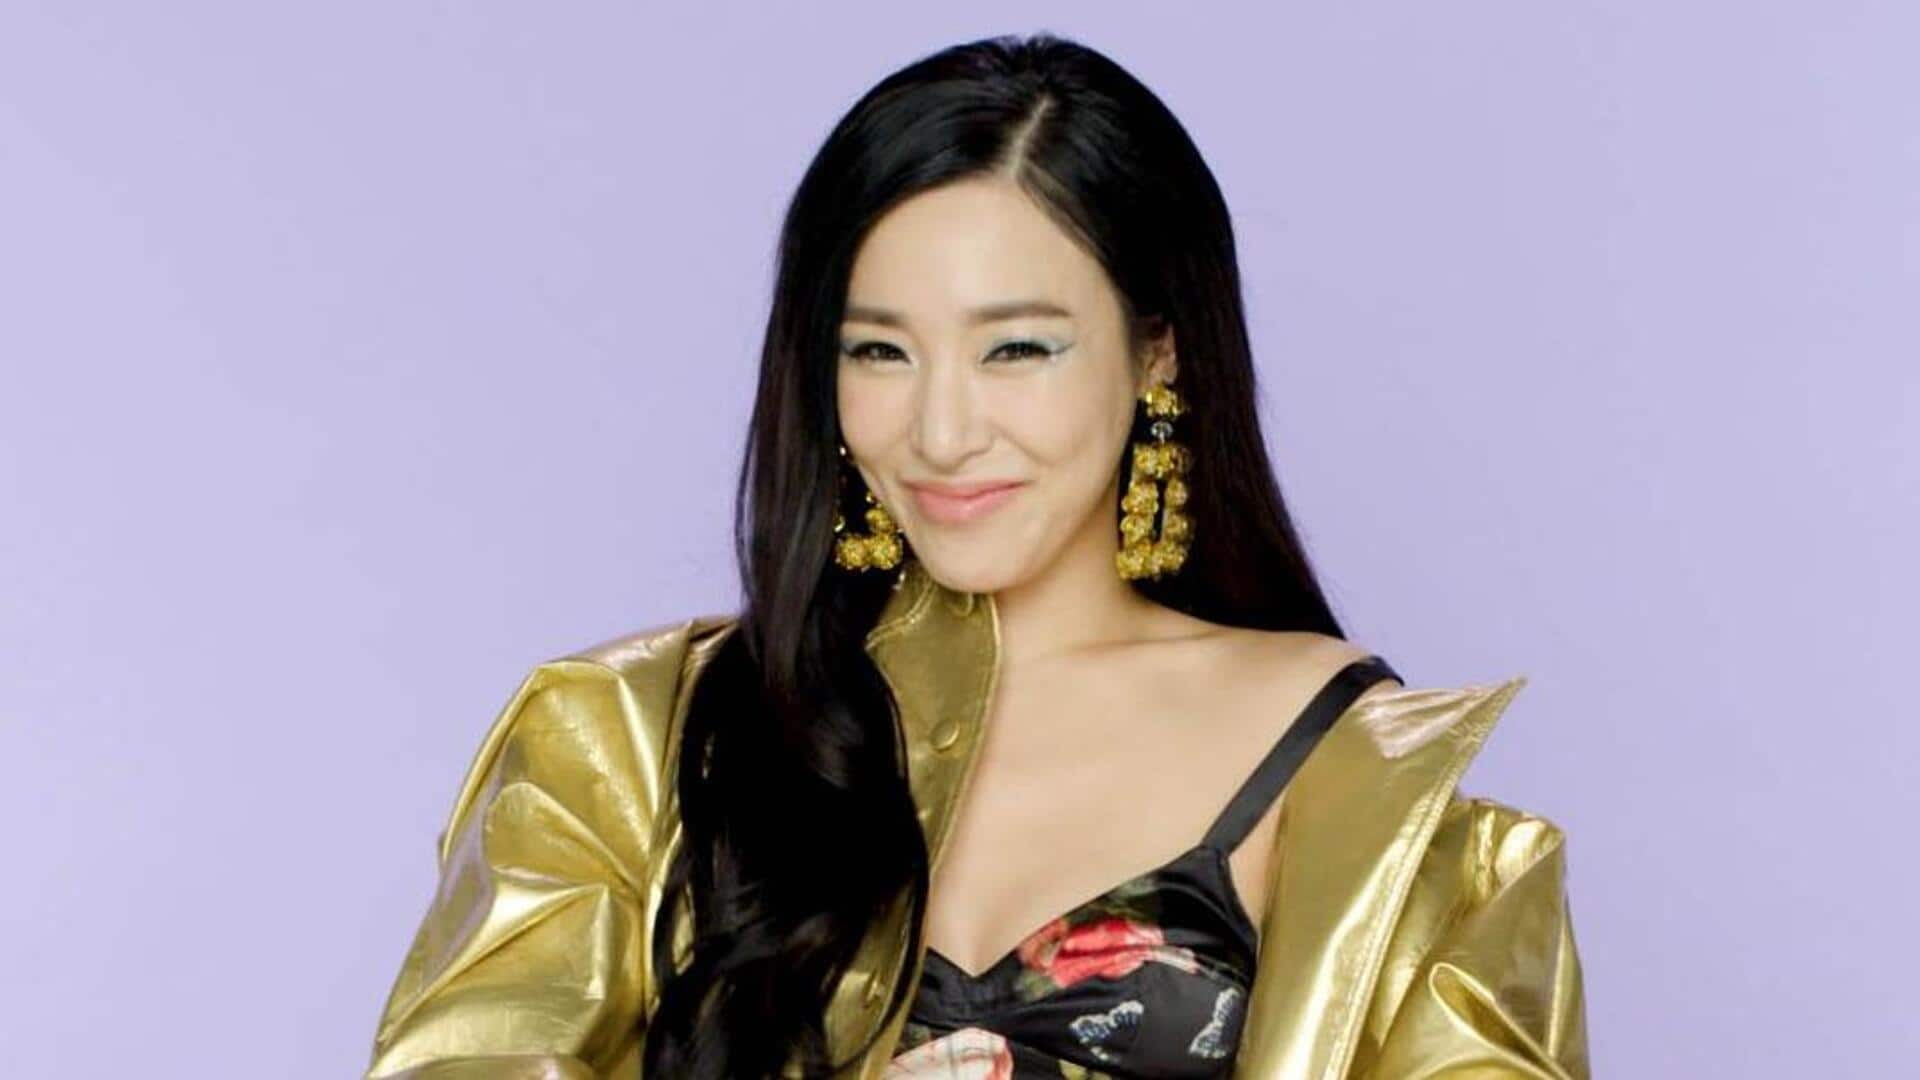 Girls' Generation's Tiffany Young takes break citing health reasons